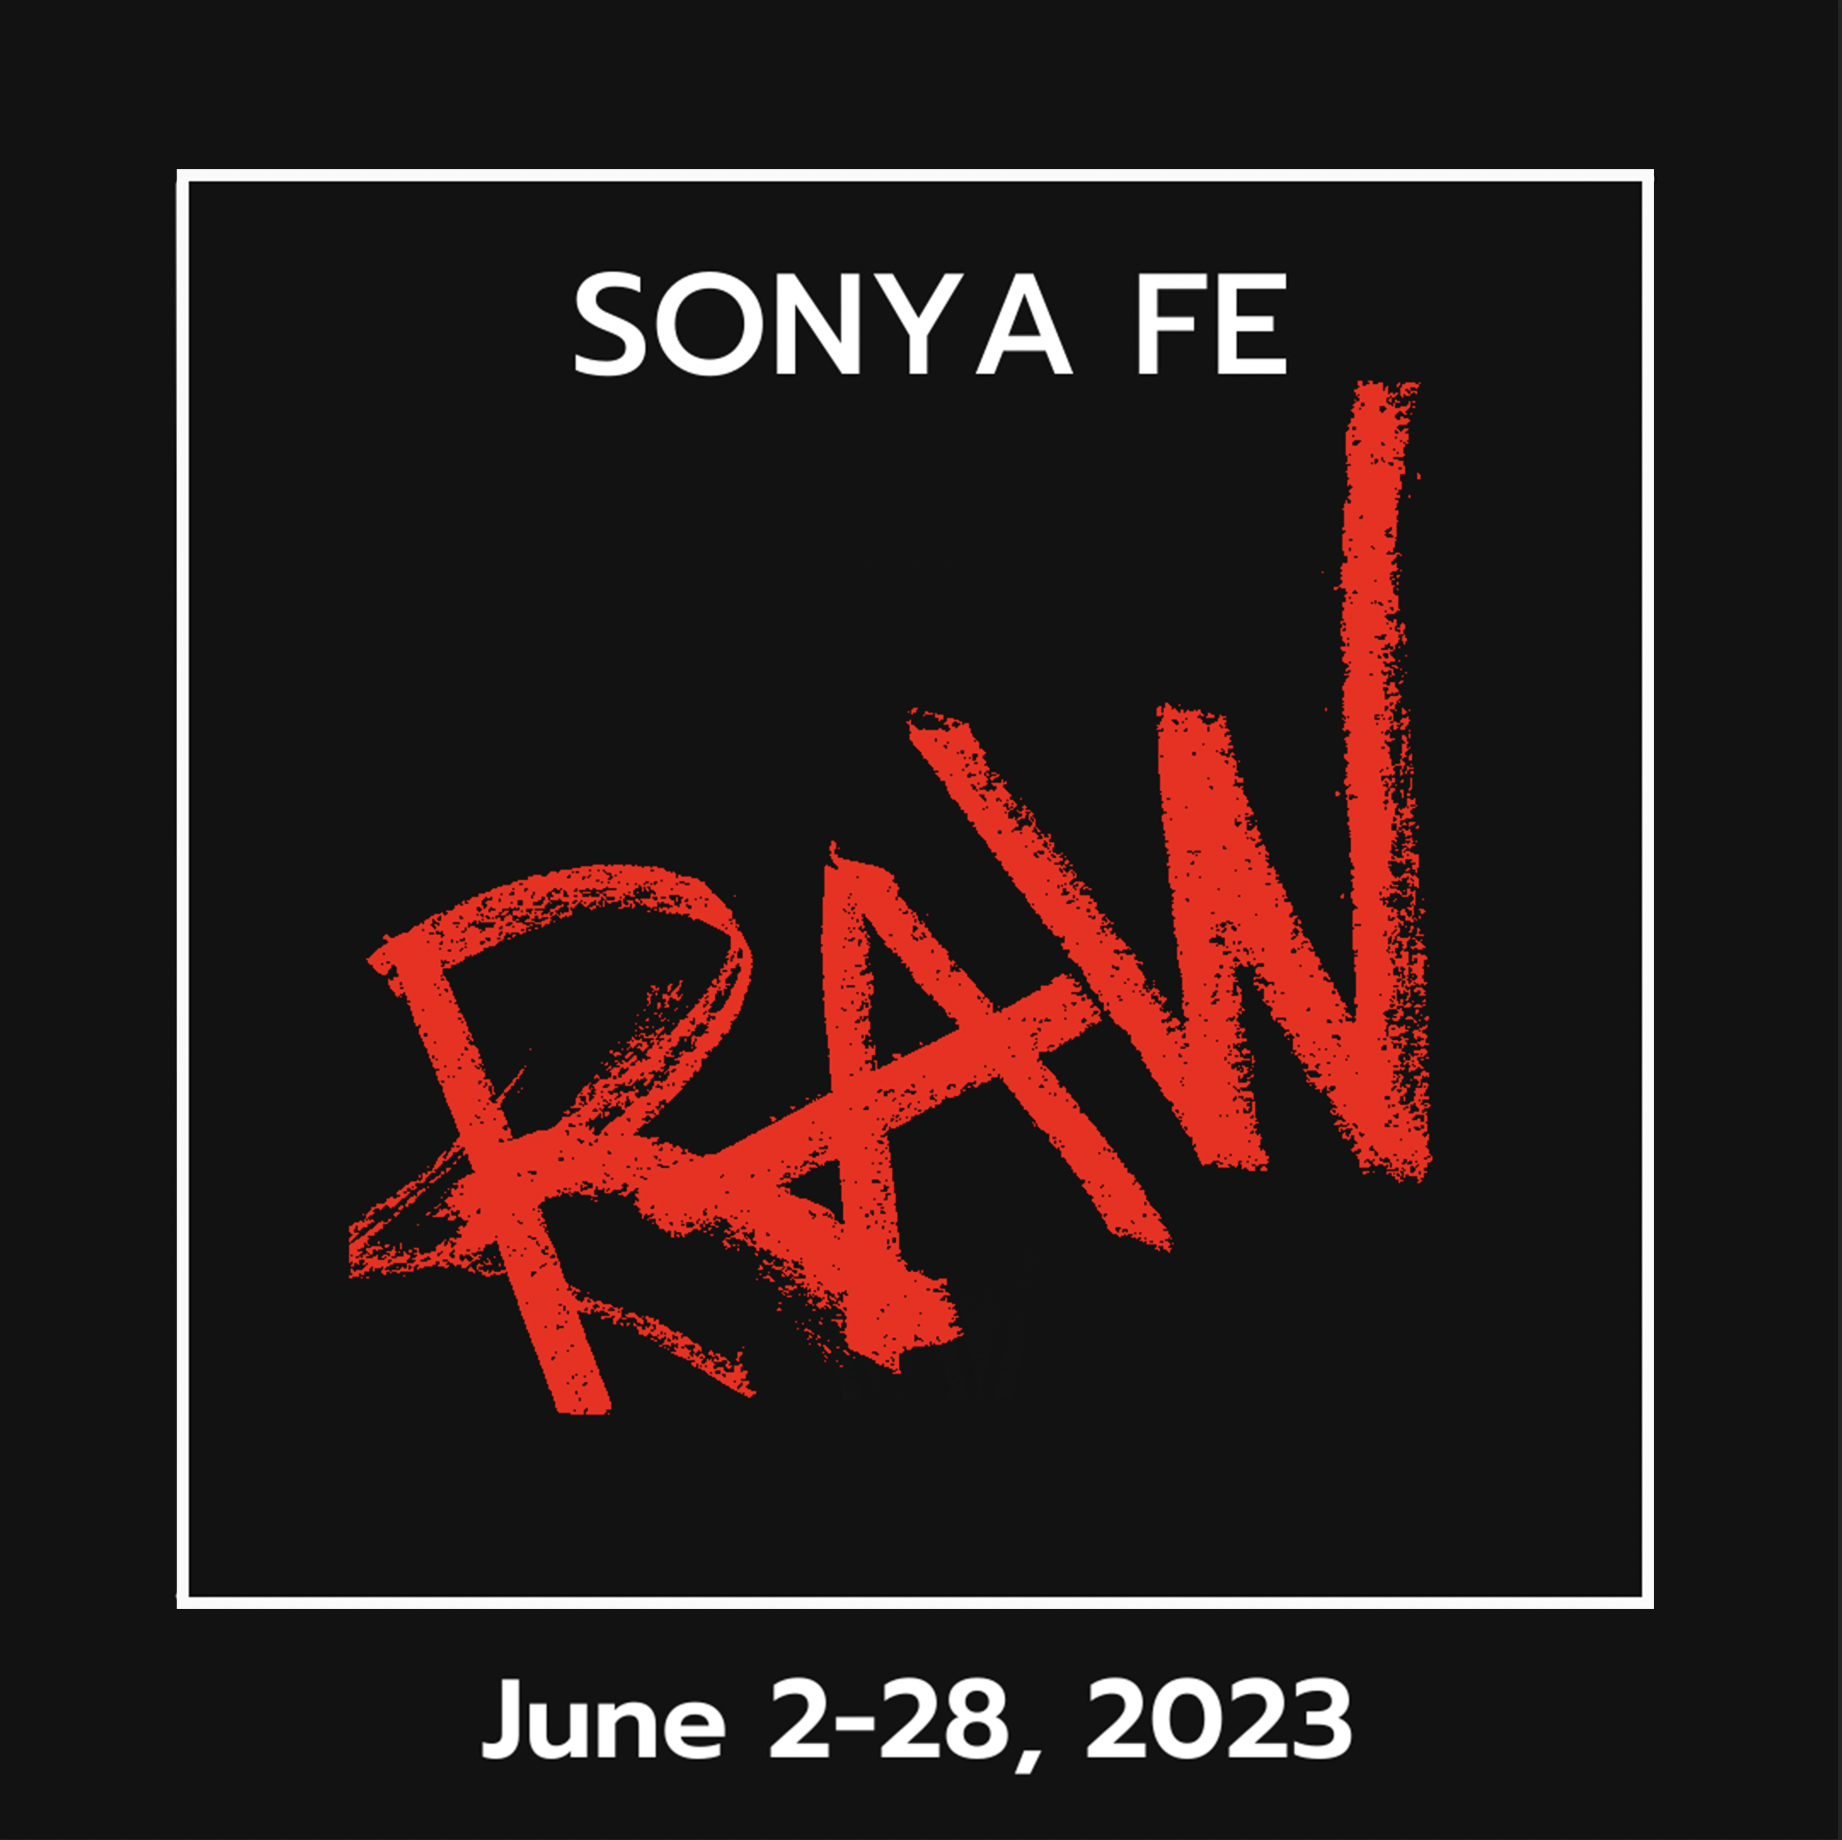 A black square displaying the title of a show called "RAW", by Sonya Fe, from June 2-28, 2023.